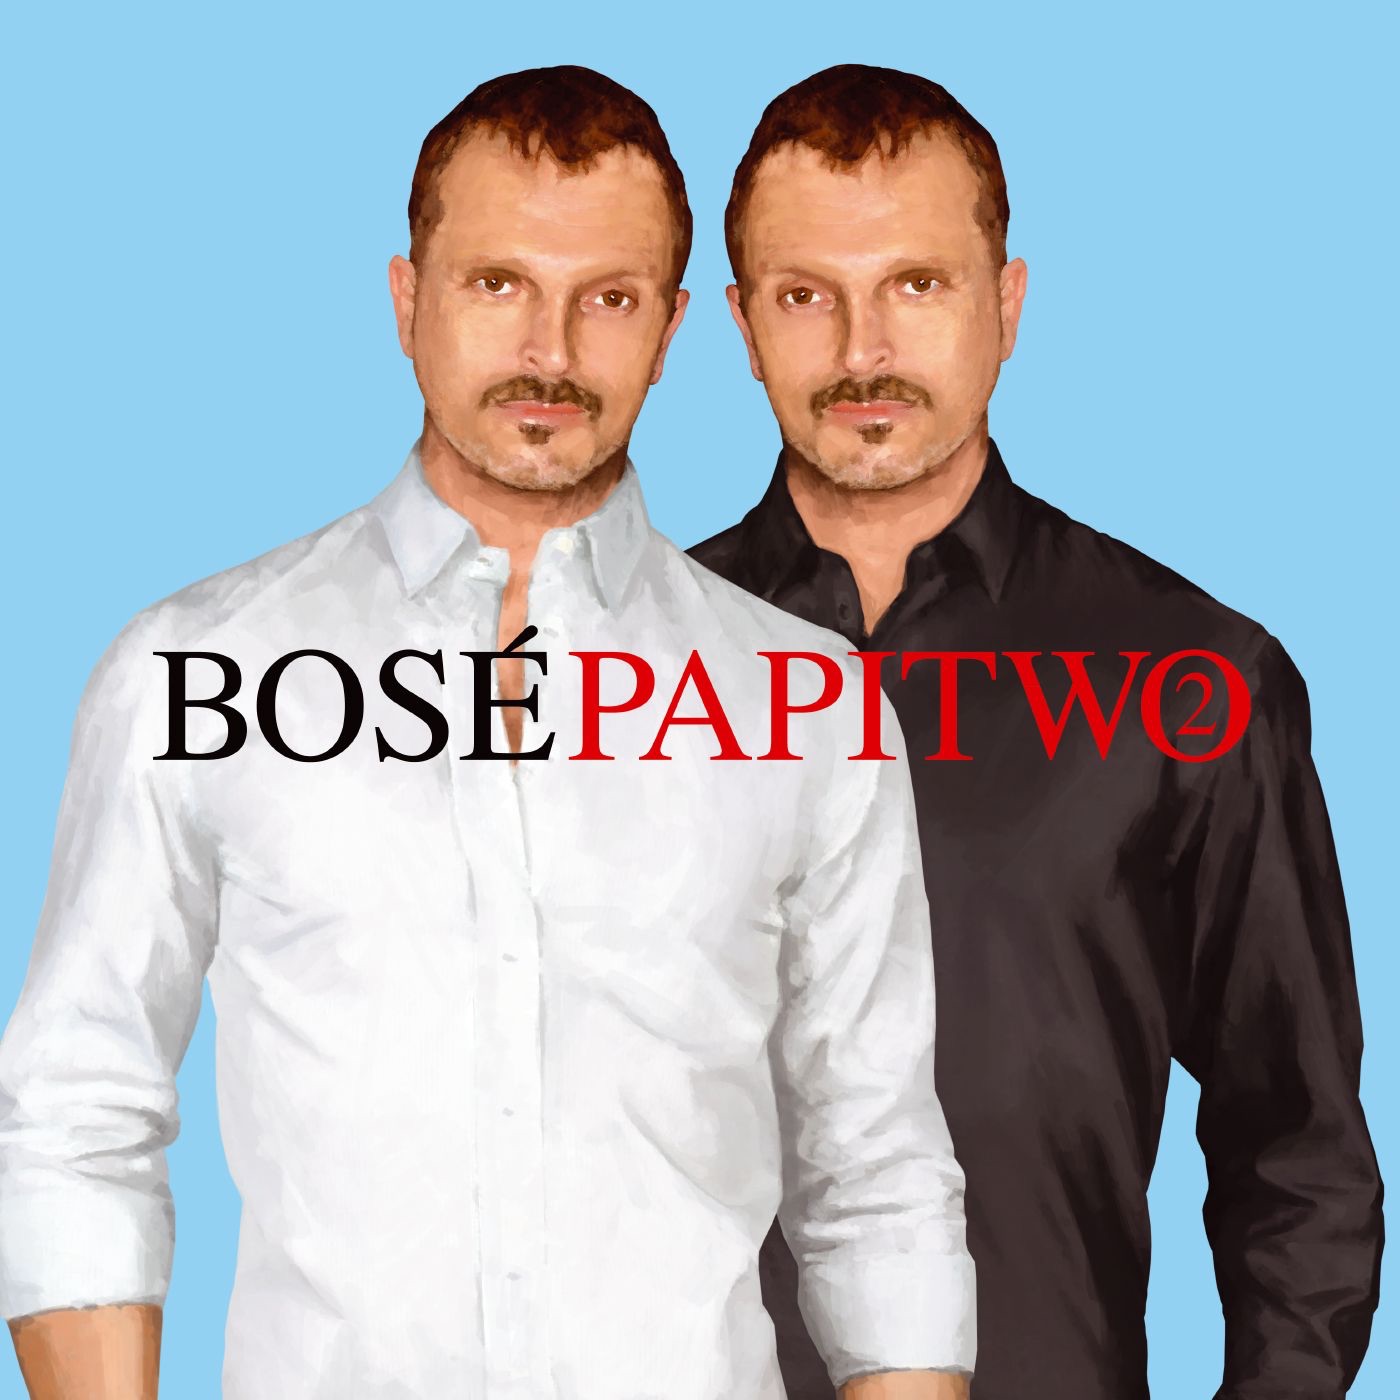 Papitwo by Miguel Bosé